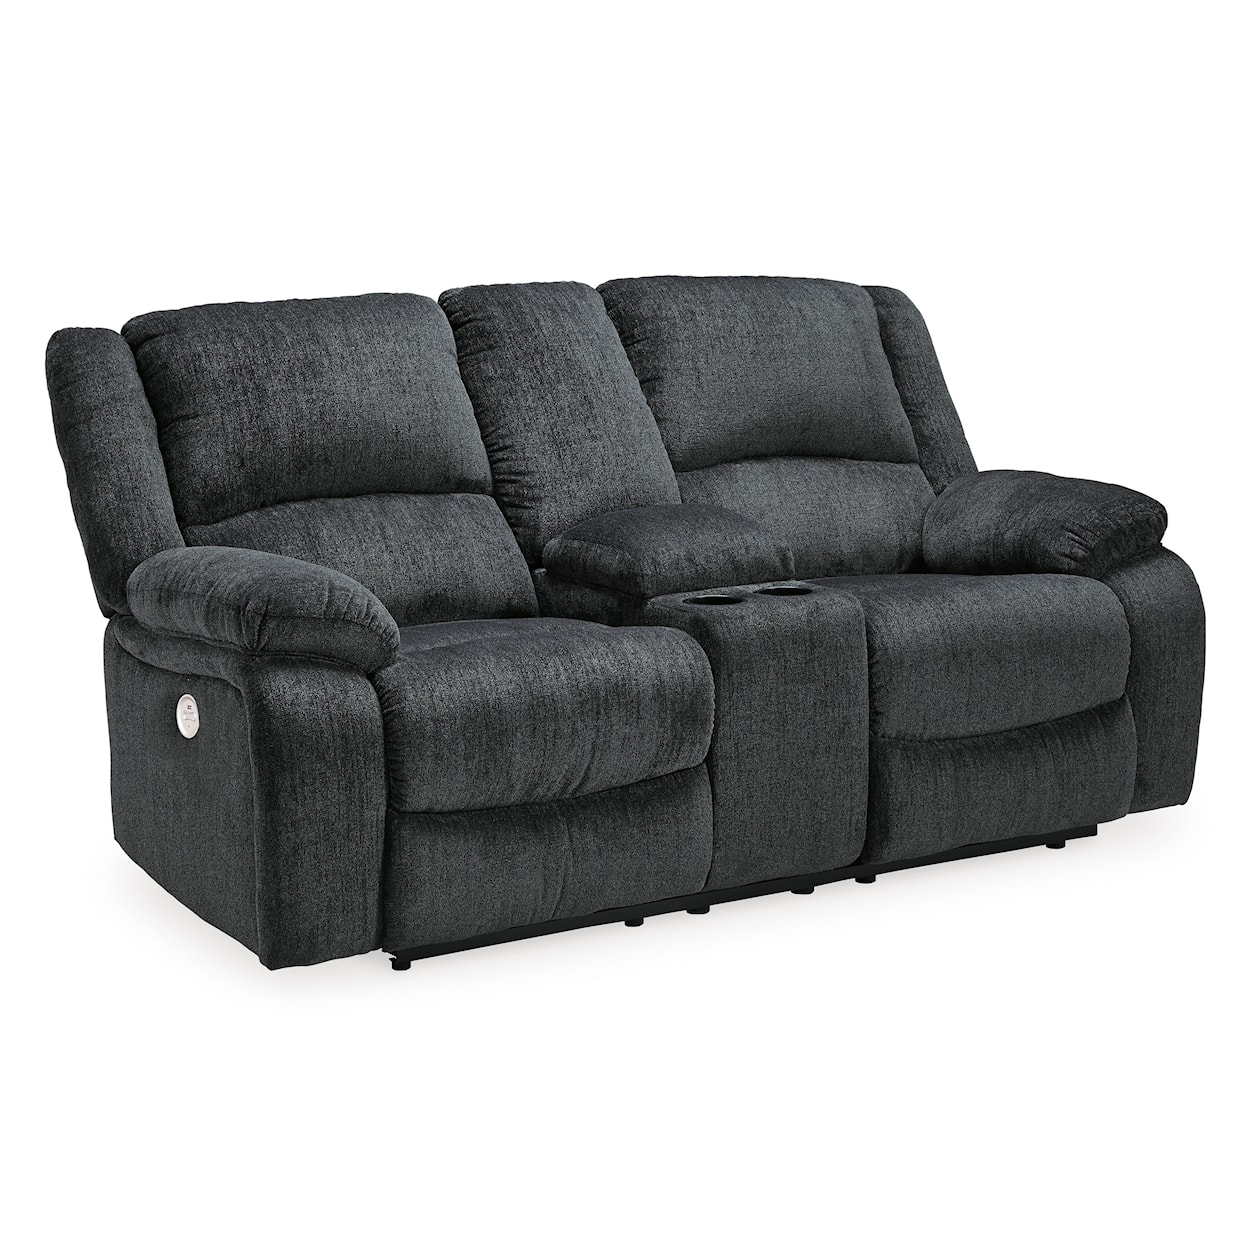 Signature Design by Ashley Draycoll Double Reclining Power Loveseat w/ Console